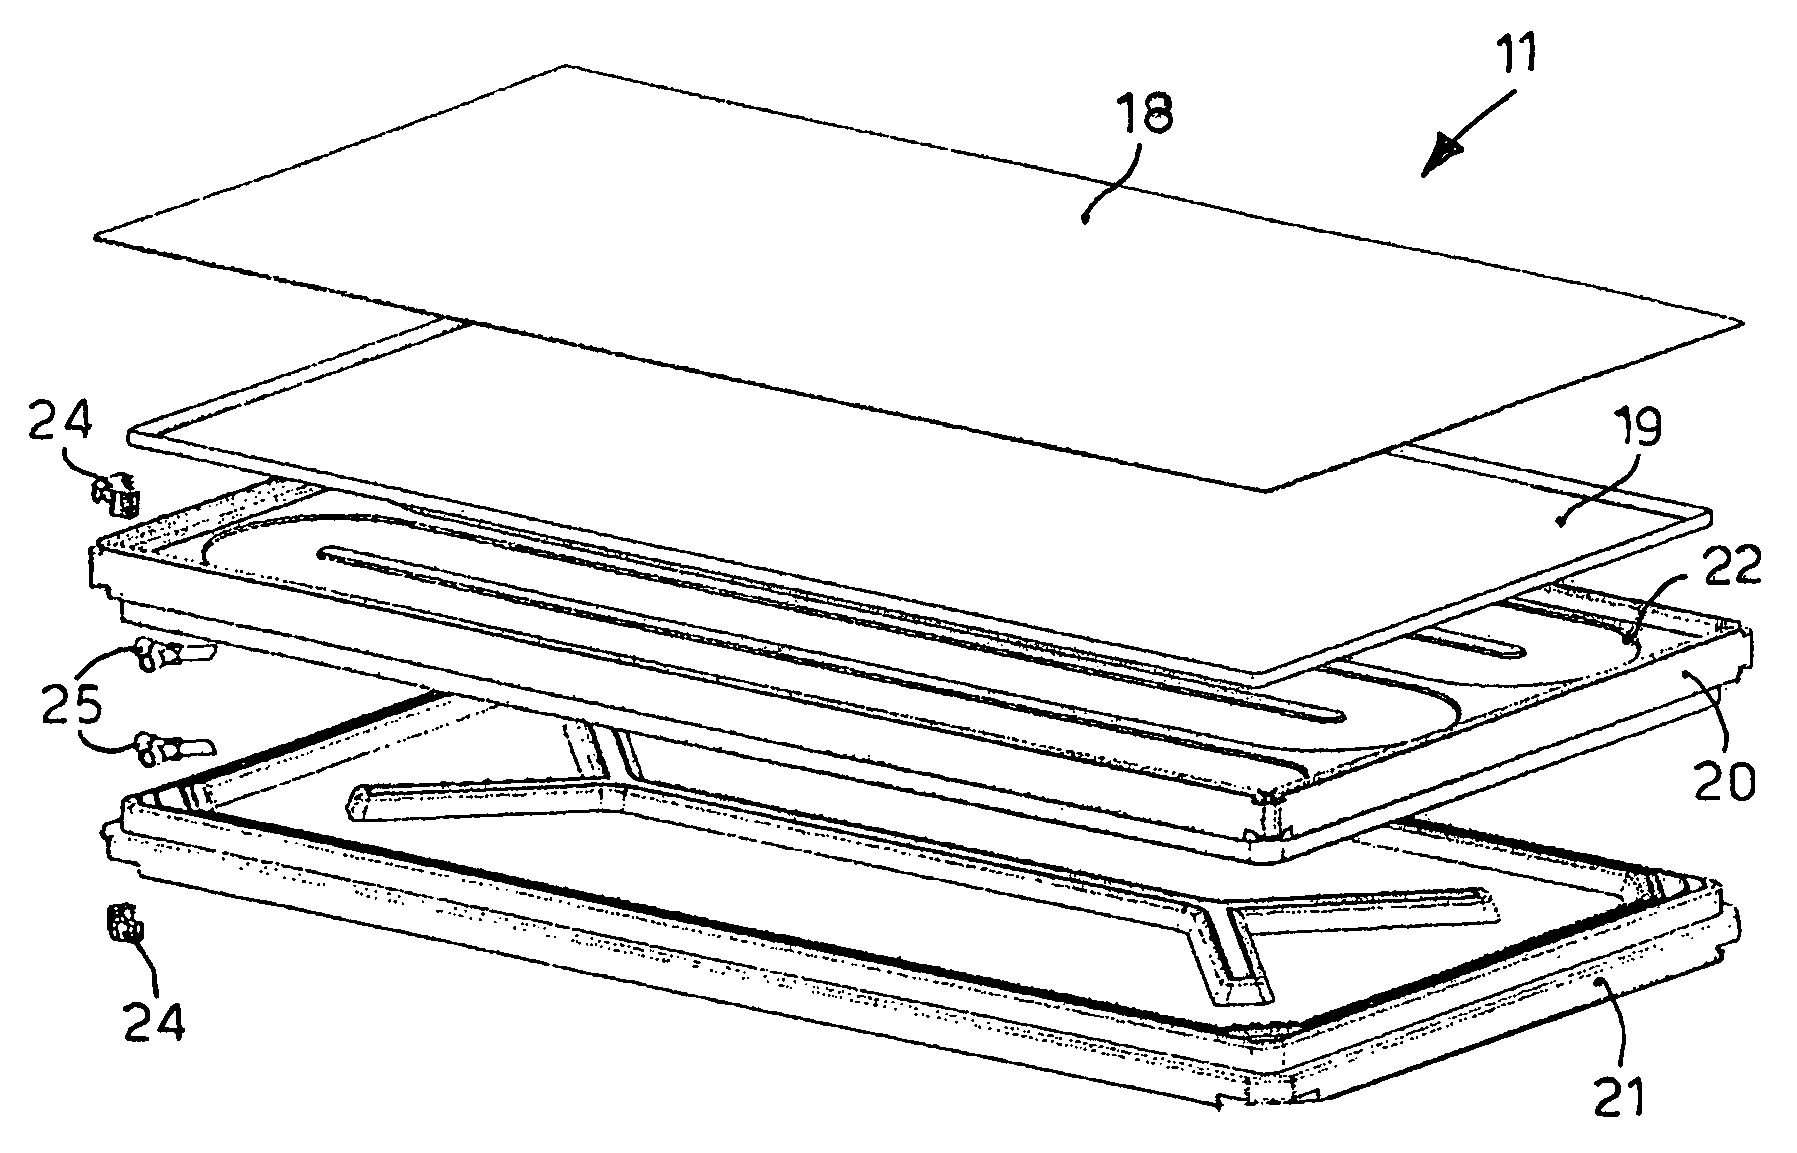 Modular panel for making covering structures for walls, covering structures or walls and method